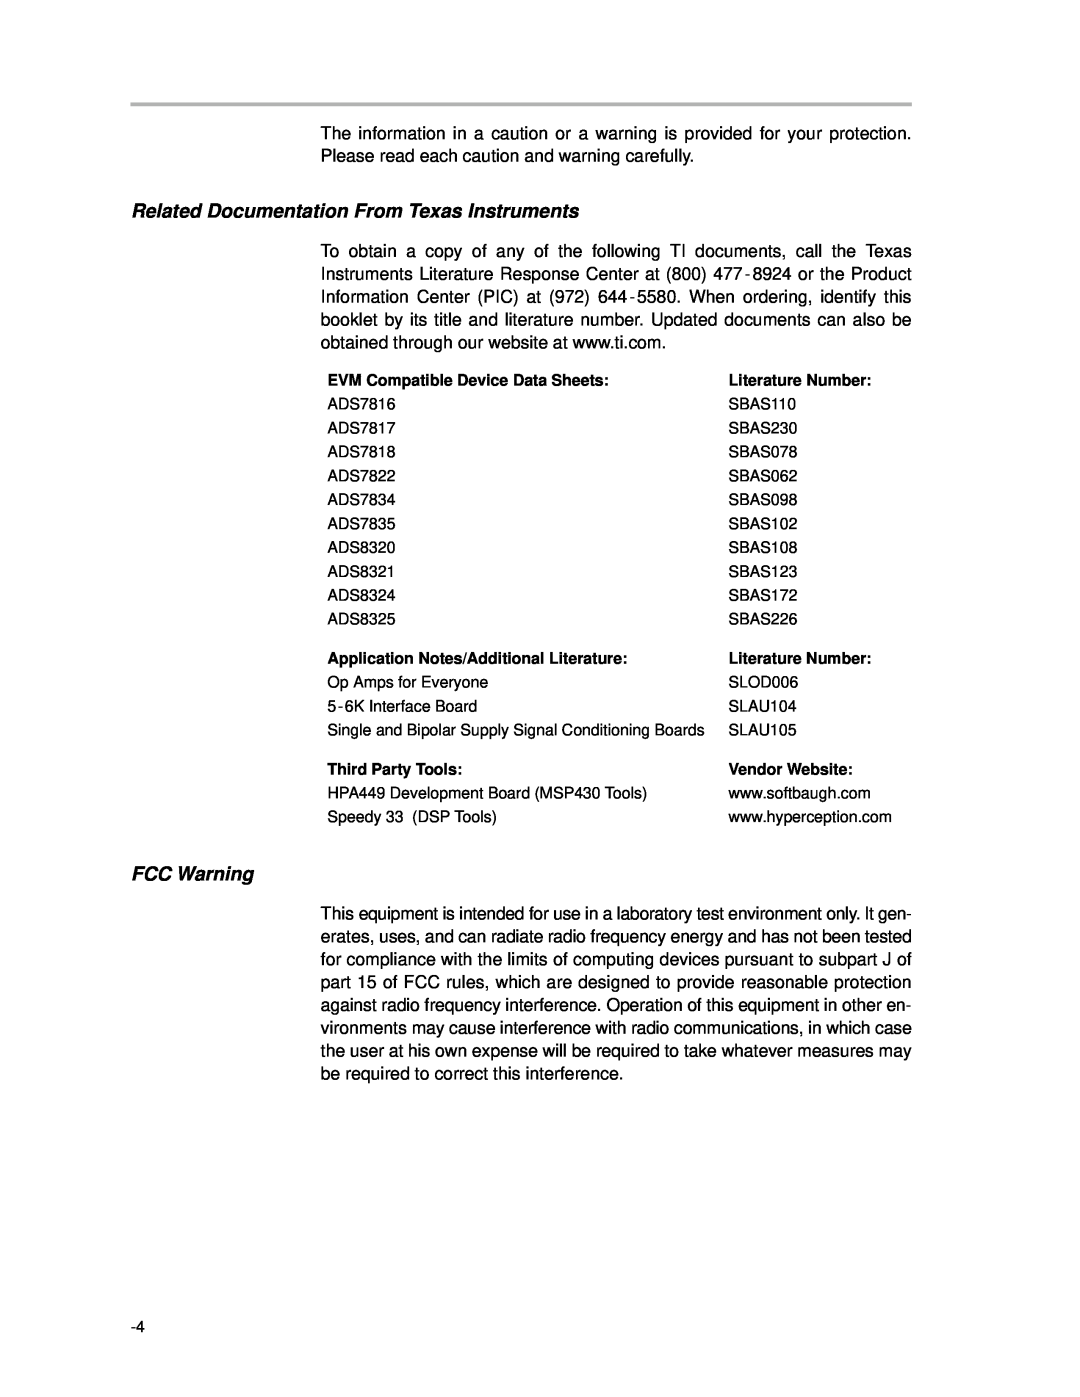 Texas Instruments MSOP8 manual Related Documentation From Texas Instruments, FCC Warning 